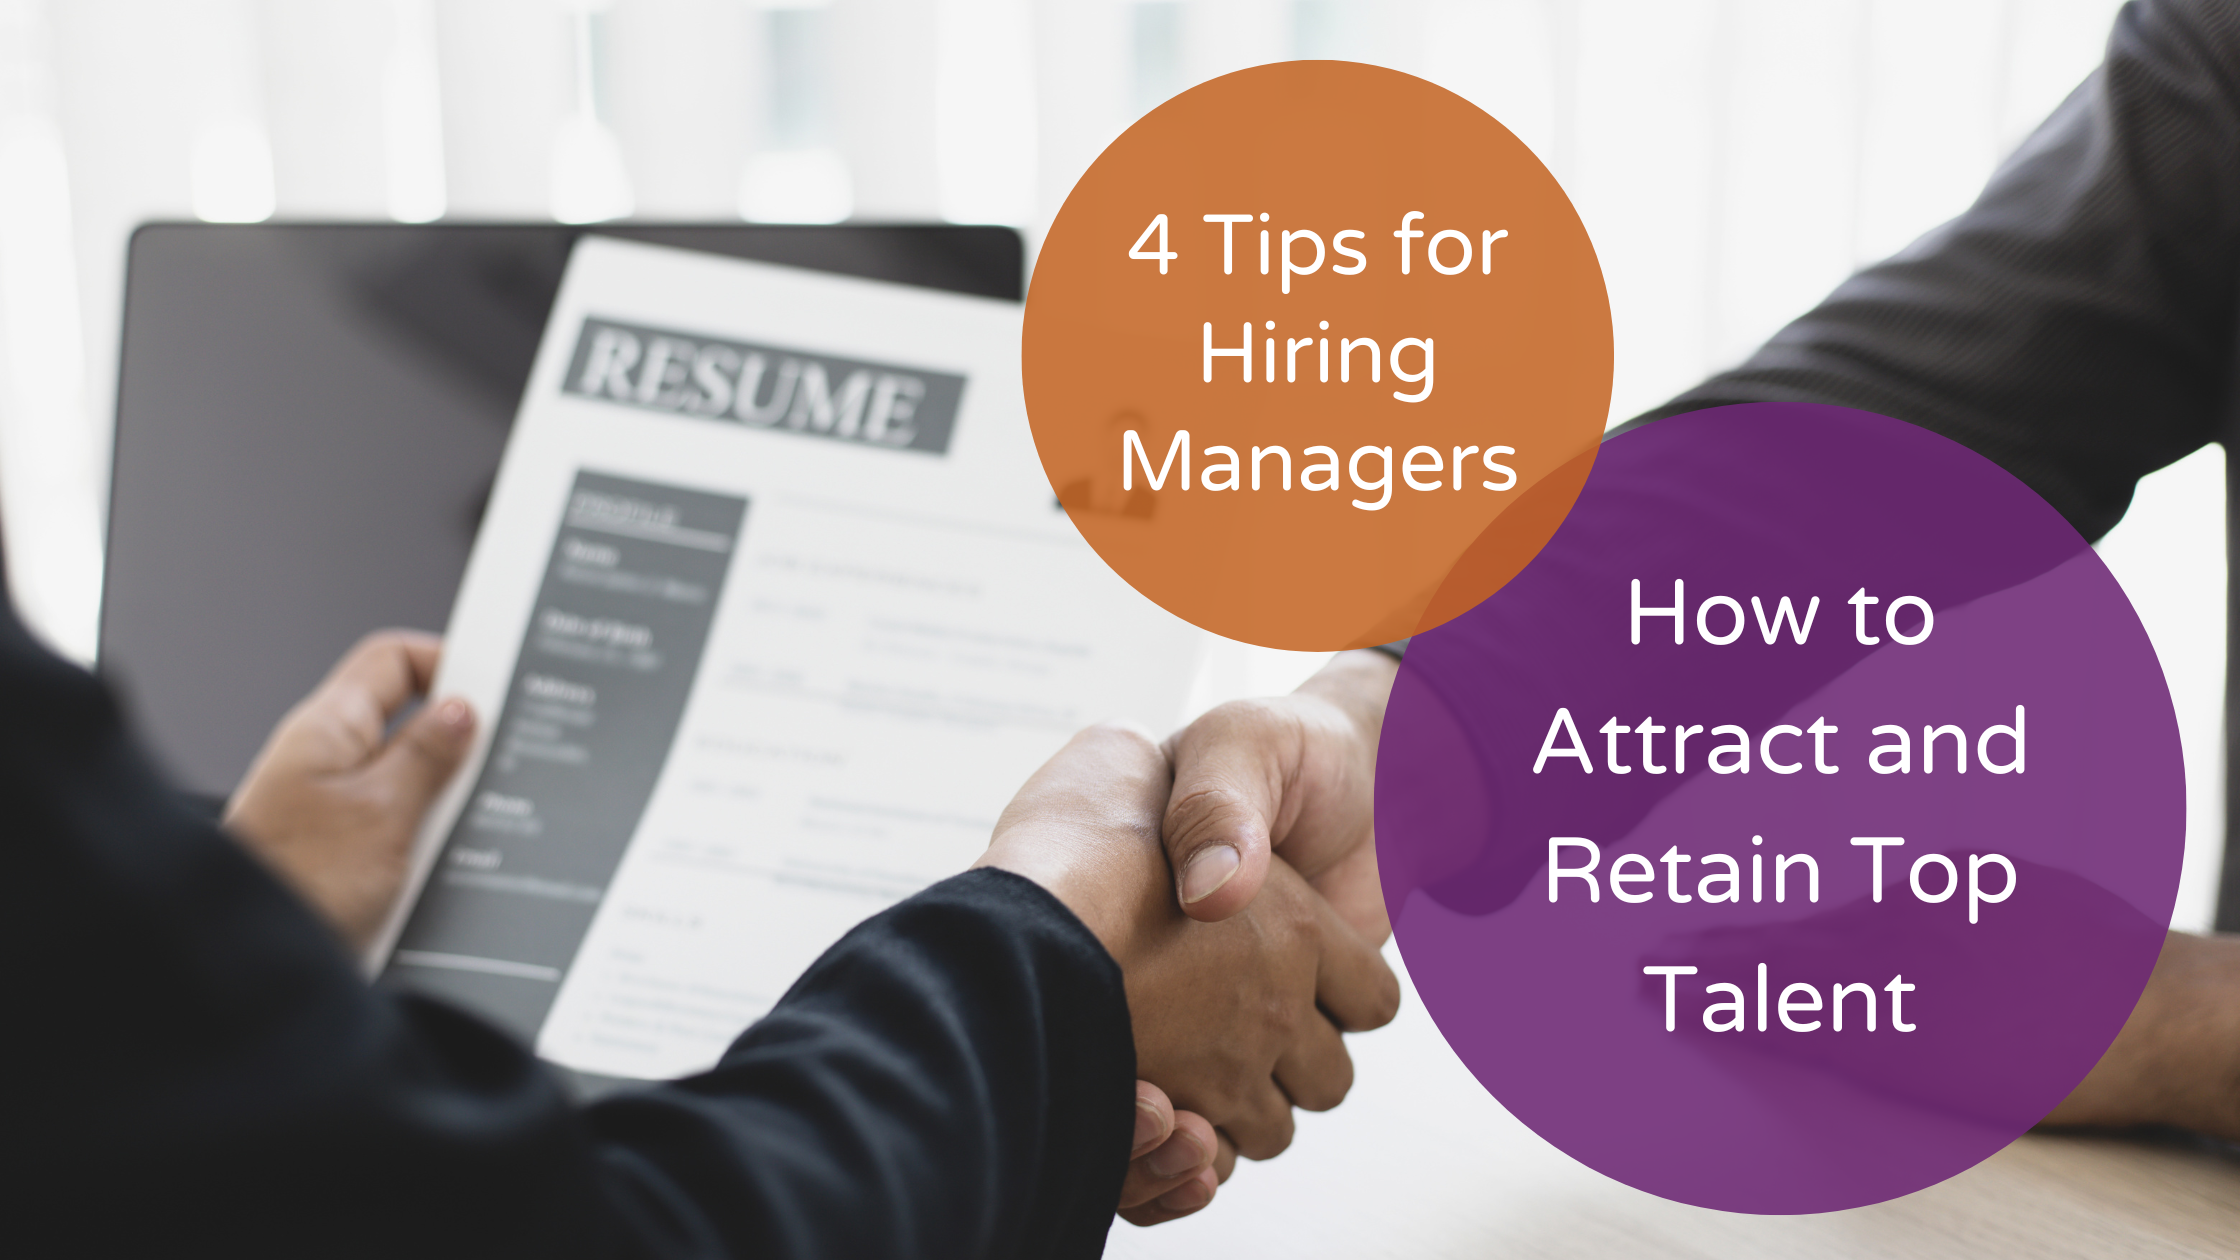 Attract and Retain Top Talent